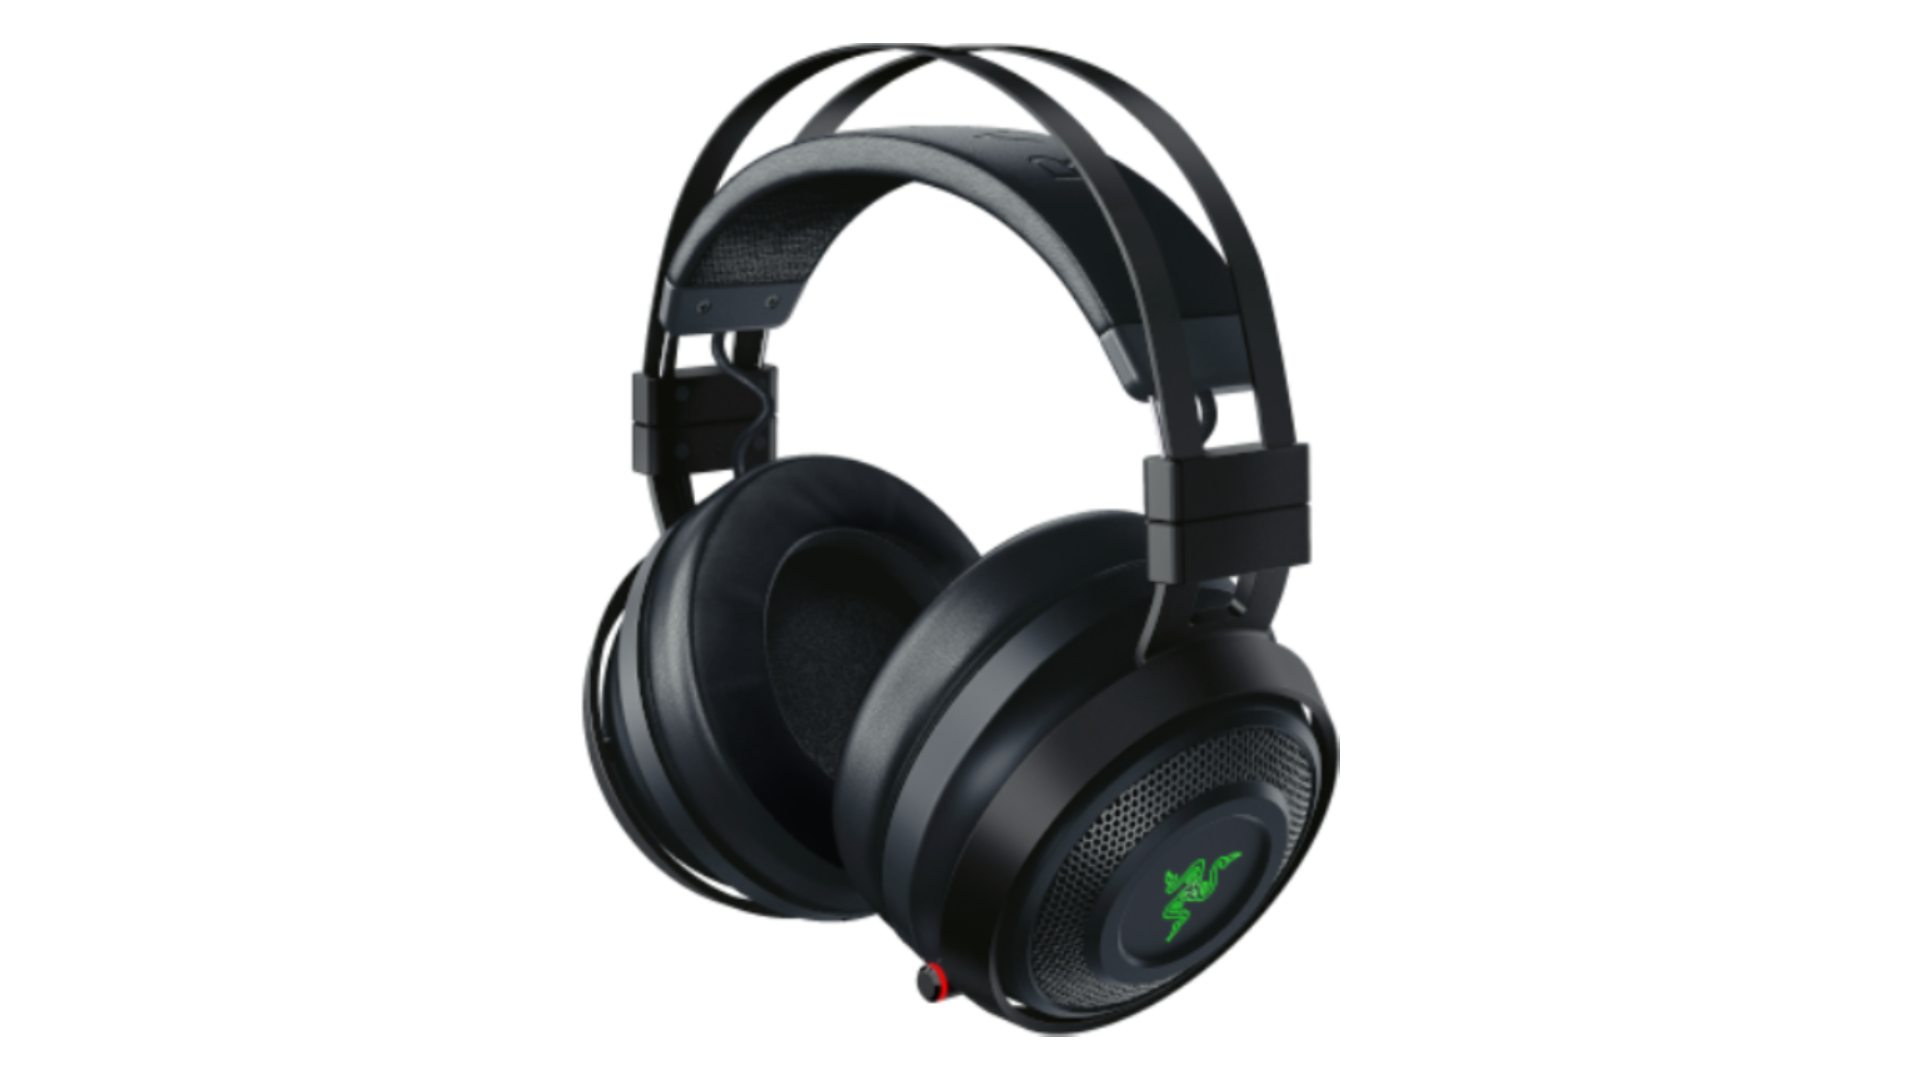 Get 50% off this Razer headset for a Spooky RE4 audio remake – Game News